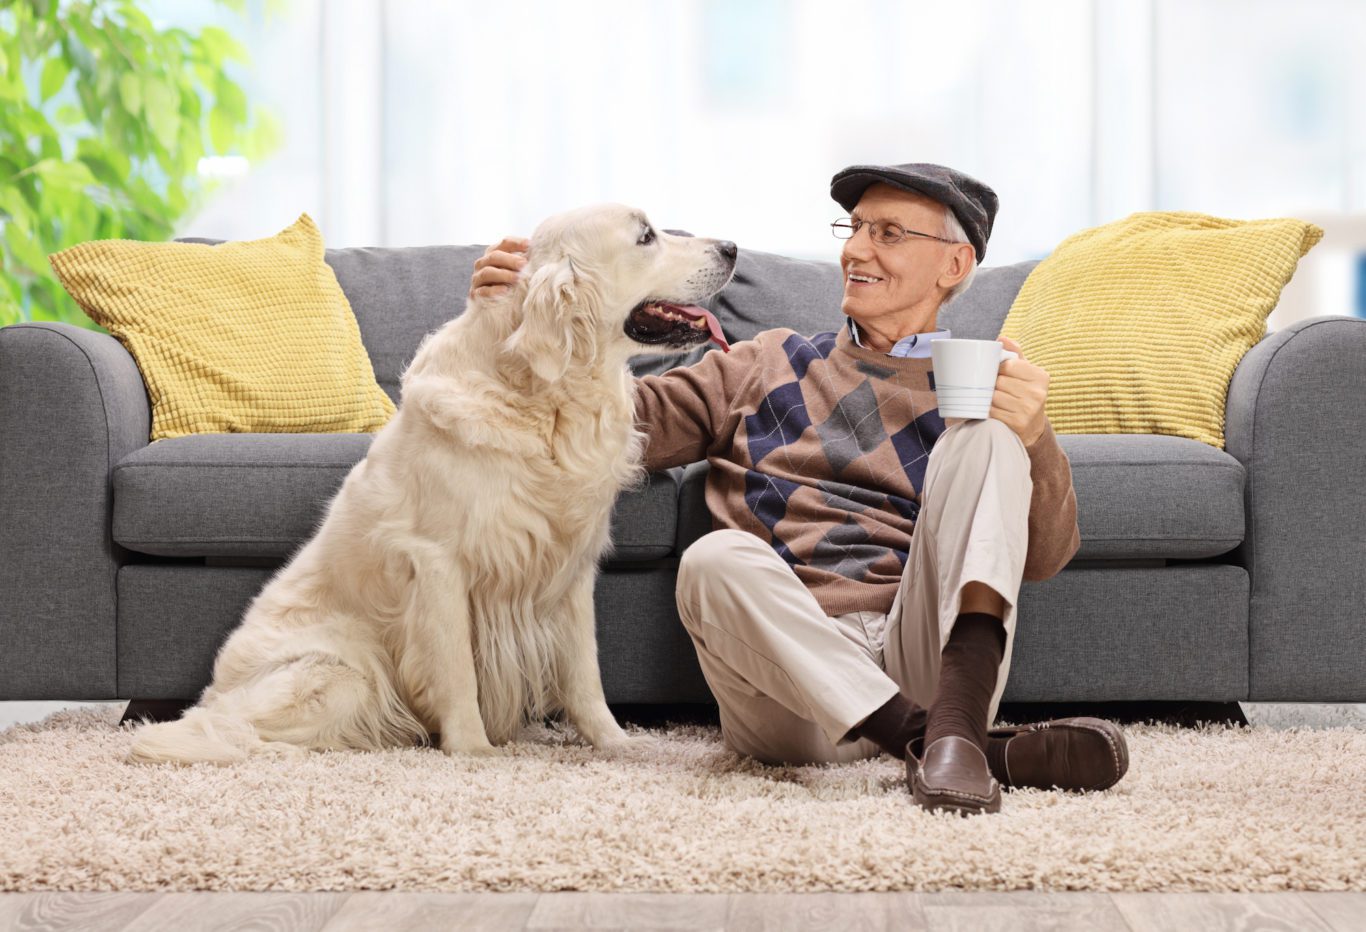 A senior man sitting on the floor and petting his dog